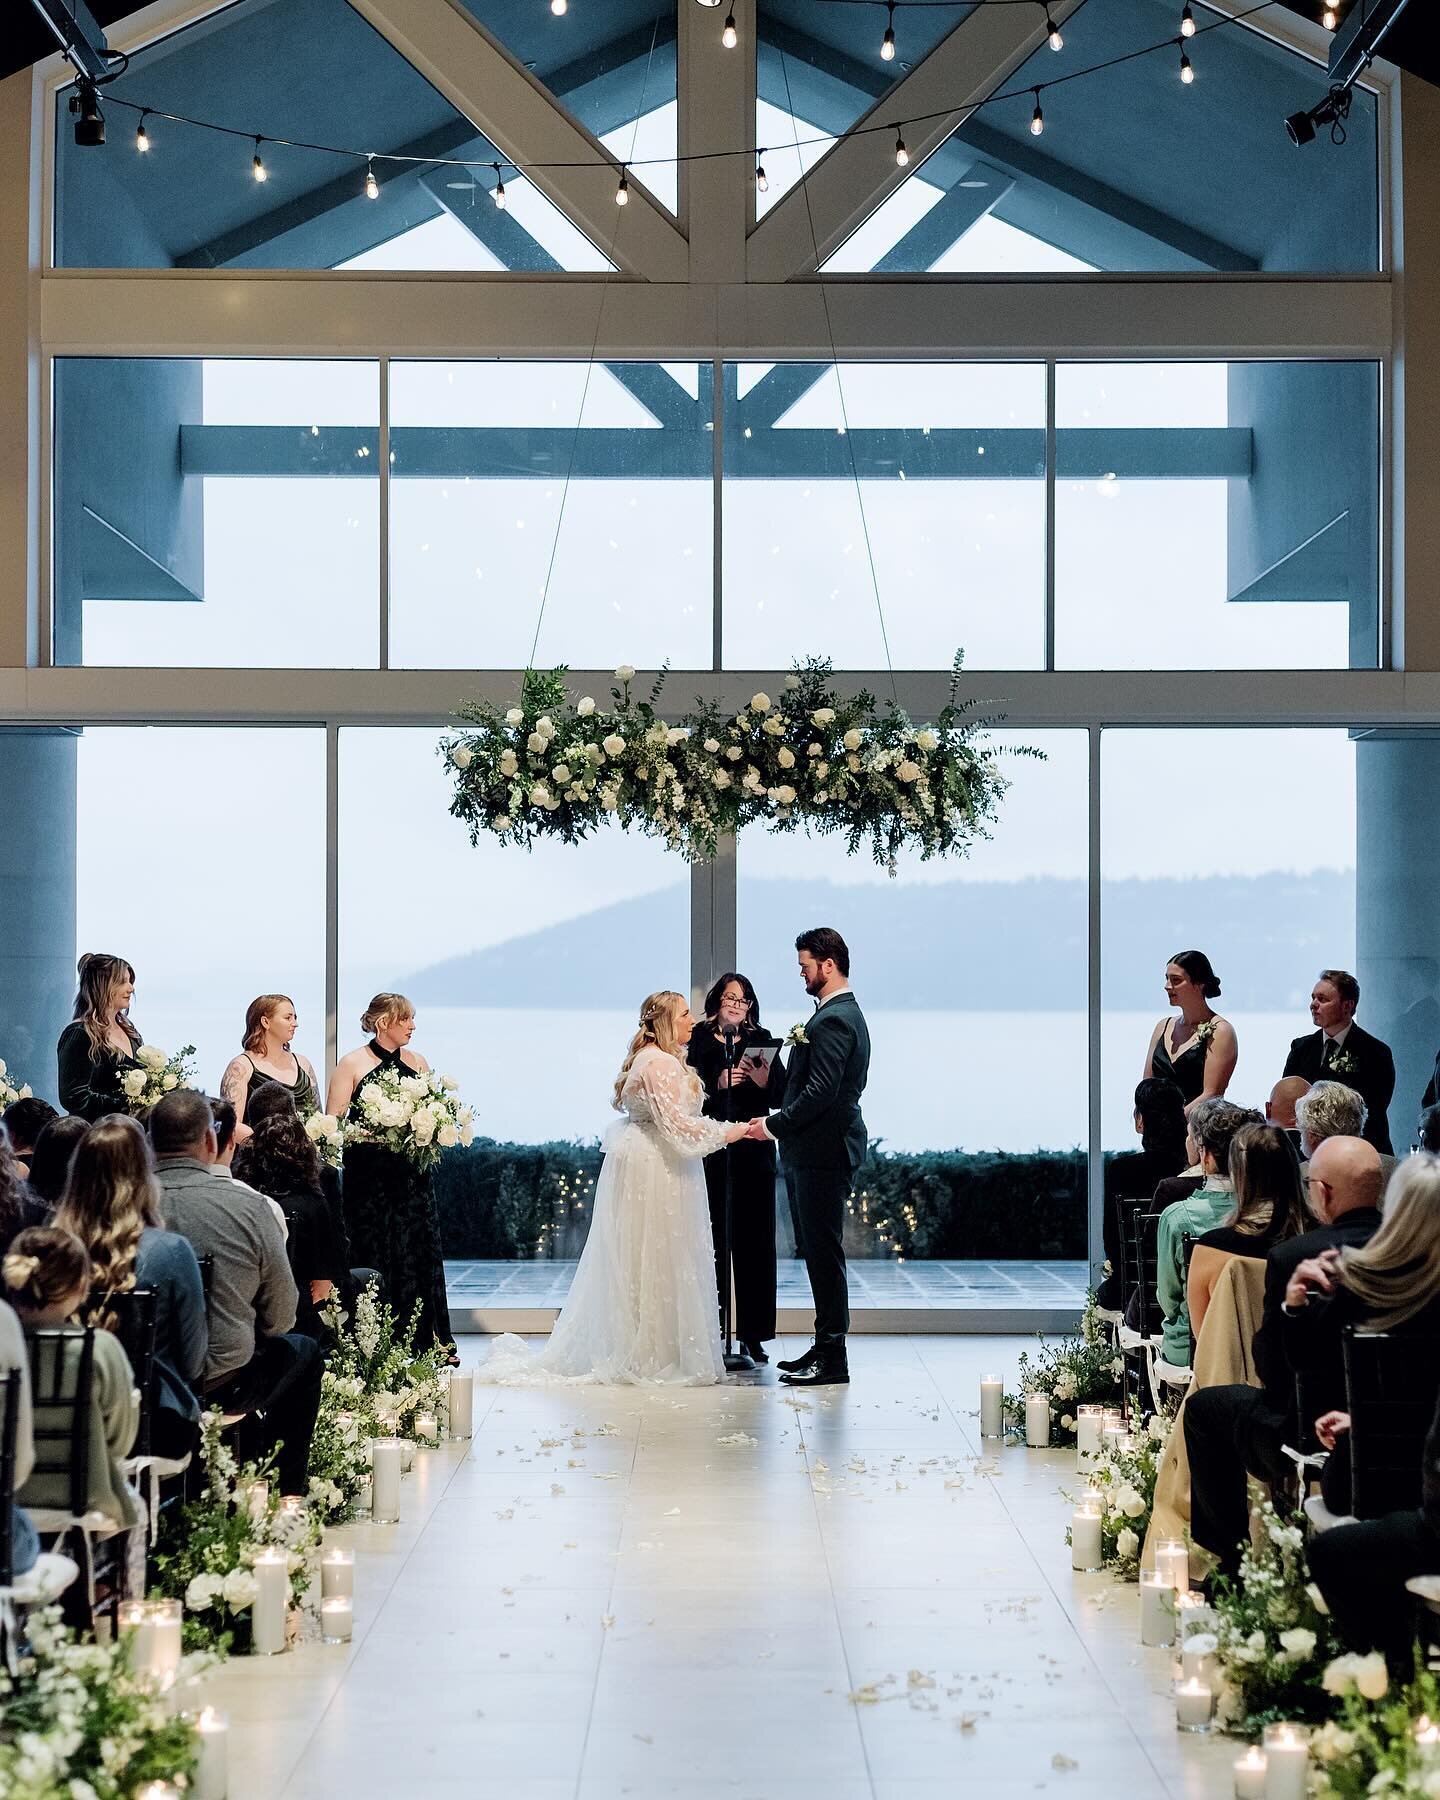 Early start to the season and we&rsquo;re all for it! Although it rained the entire day, these two managed to stay fully focused on their love. Nothing could ruin such a beautiful day! 🥂

Venue: @cdaresortweddings @cdaresort 
Planner: @ashleygrahame